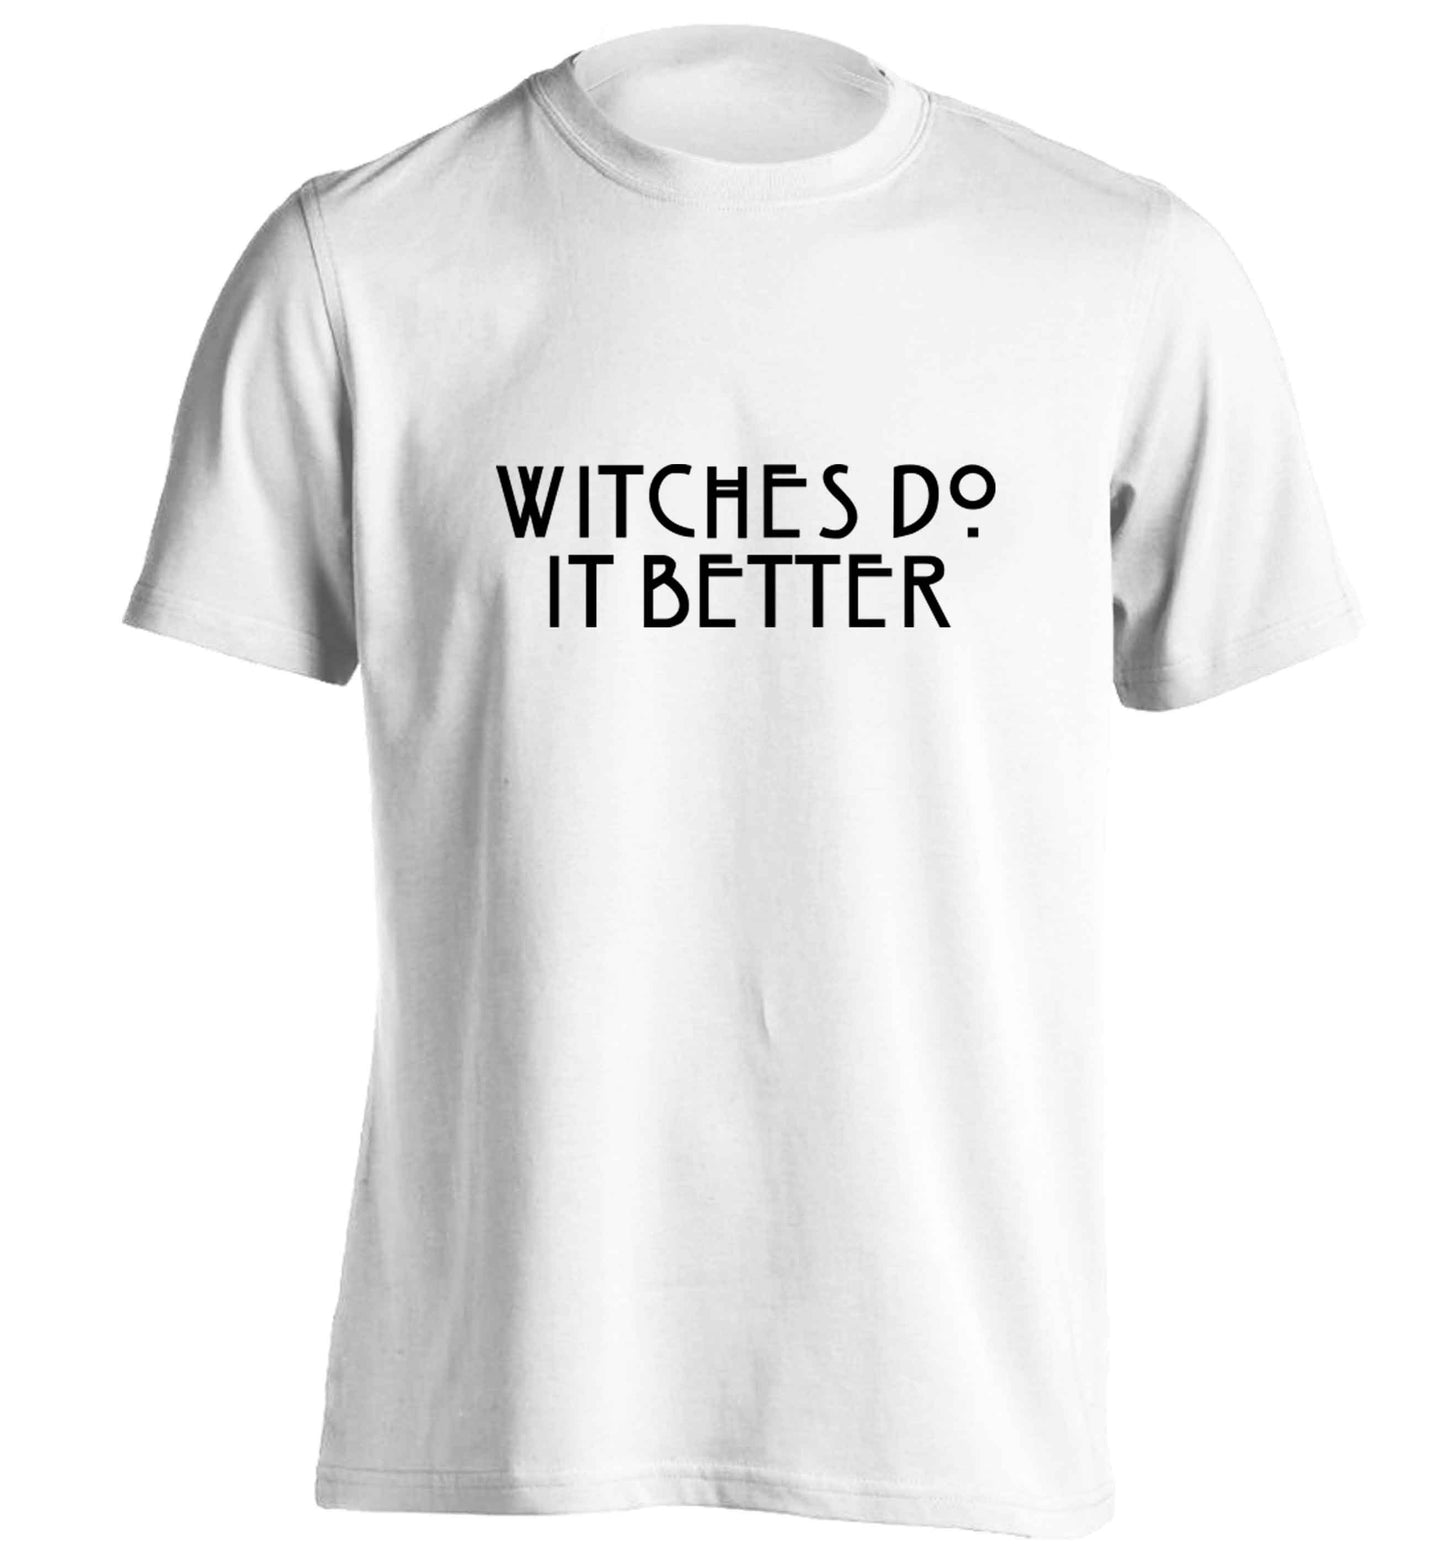 Witches do it better adults unisex white Tshirt 2XL